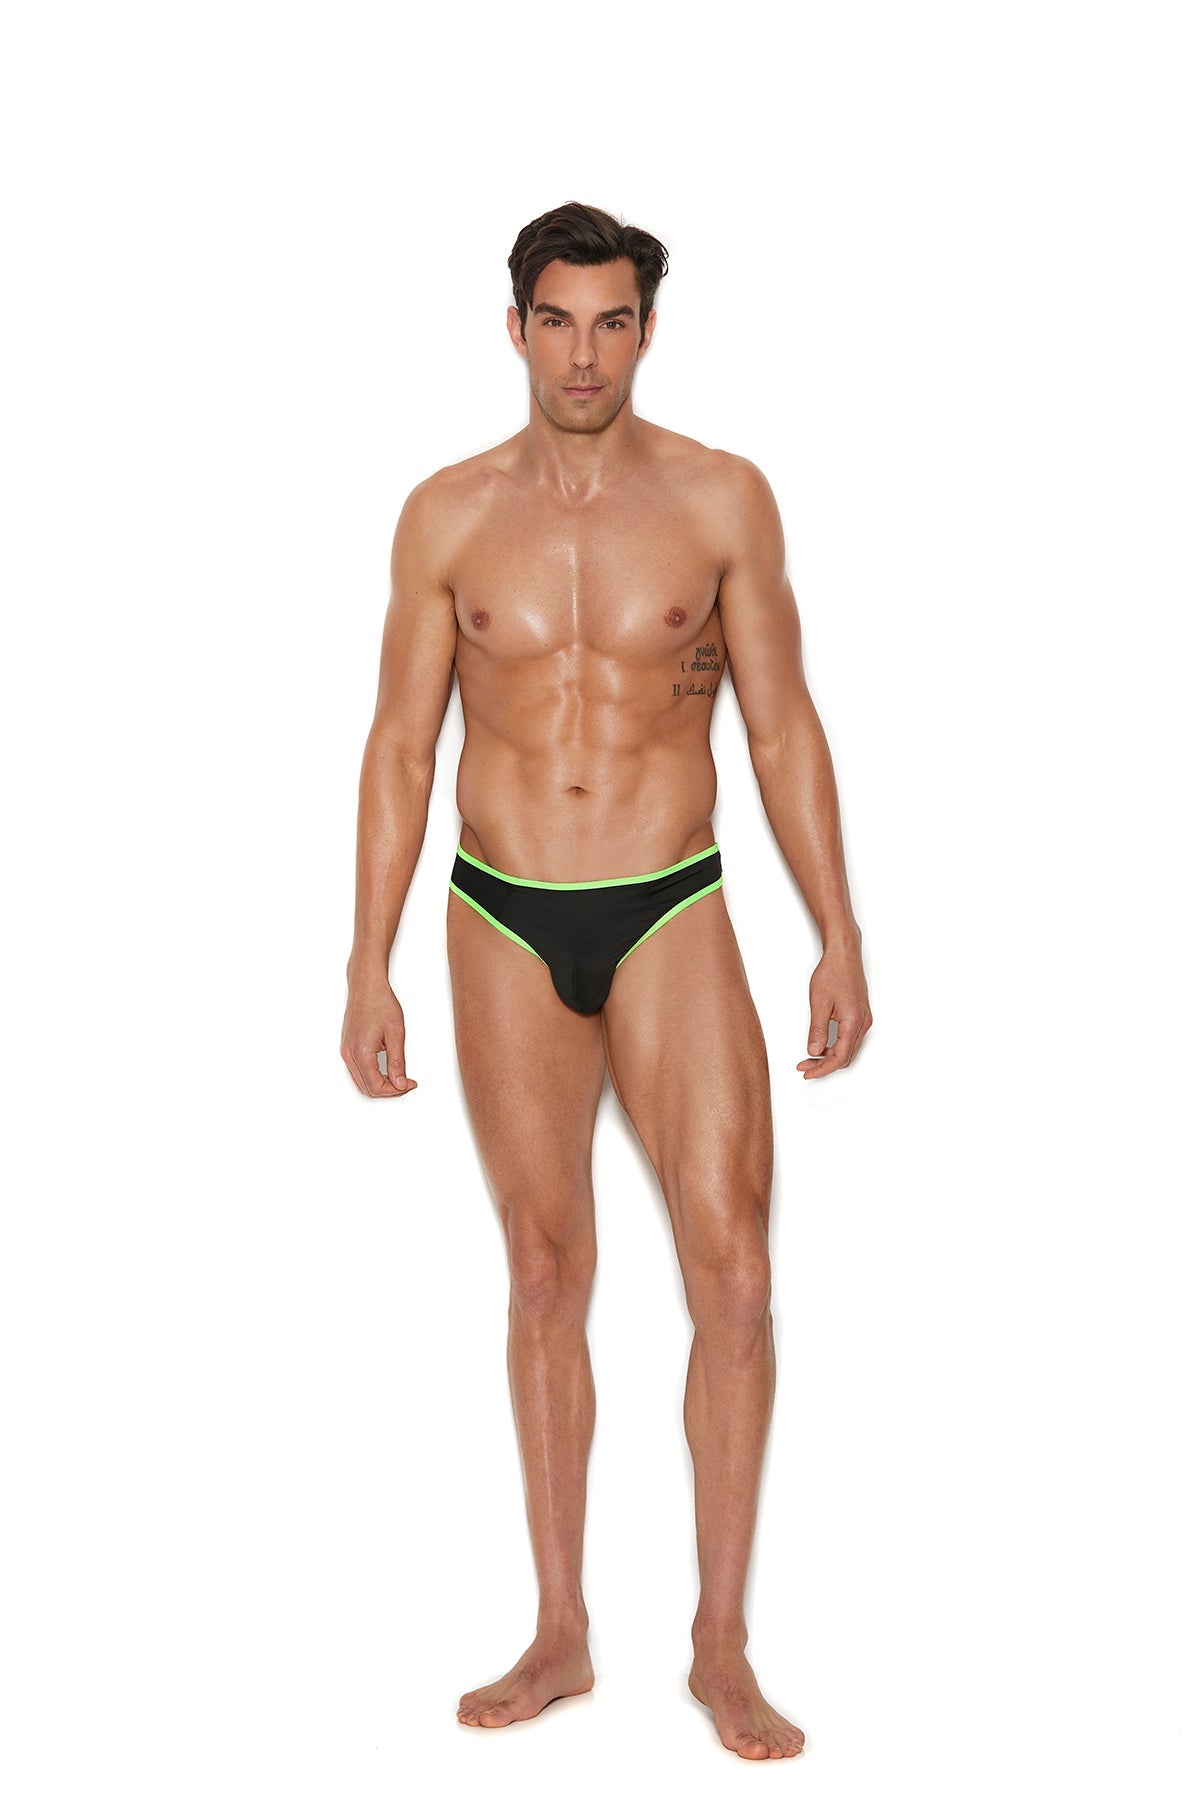 Men's Thong With Neon Green Trim - DealByEthan.gay